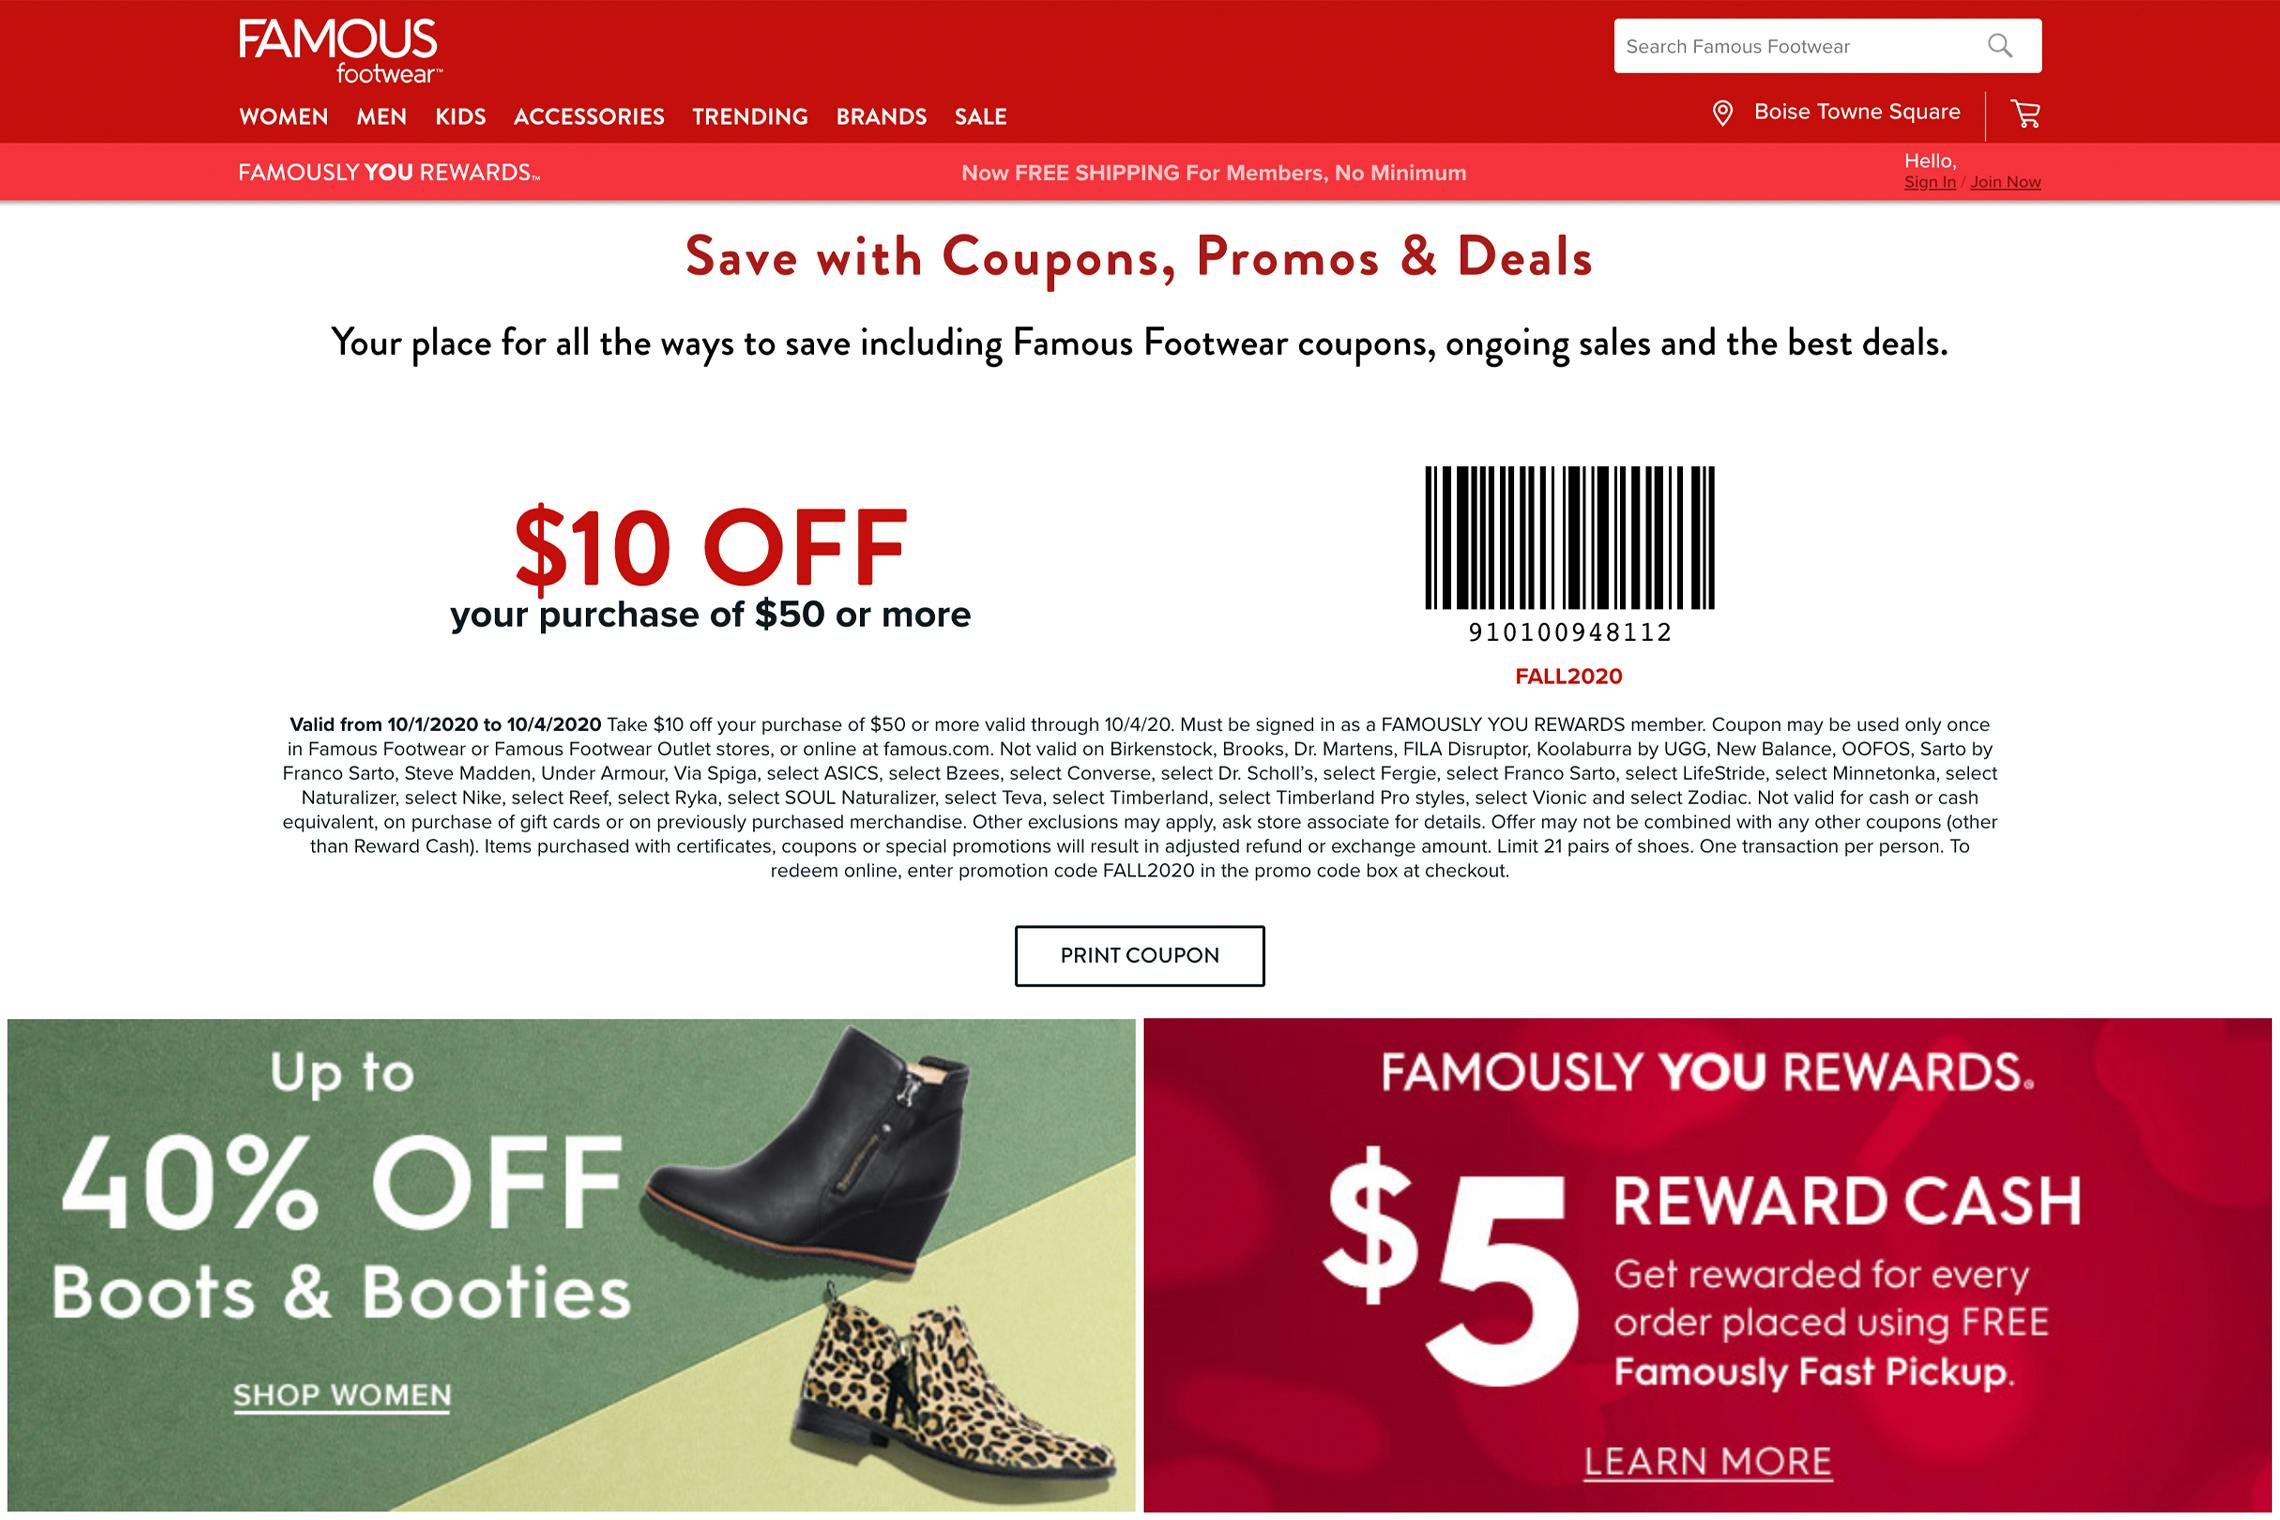 16 Famous Footwear Coupons and Tricks for Deals on Kicks - The Krazy